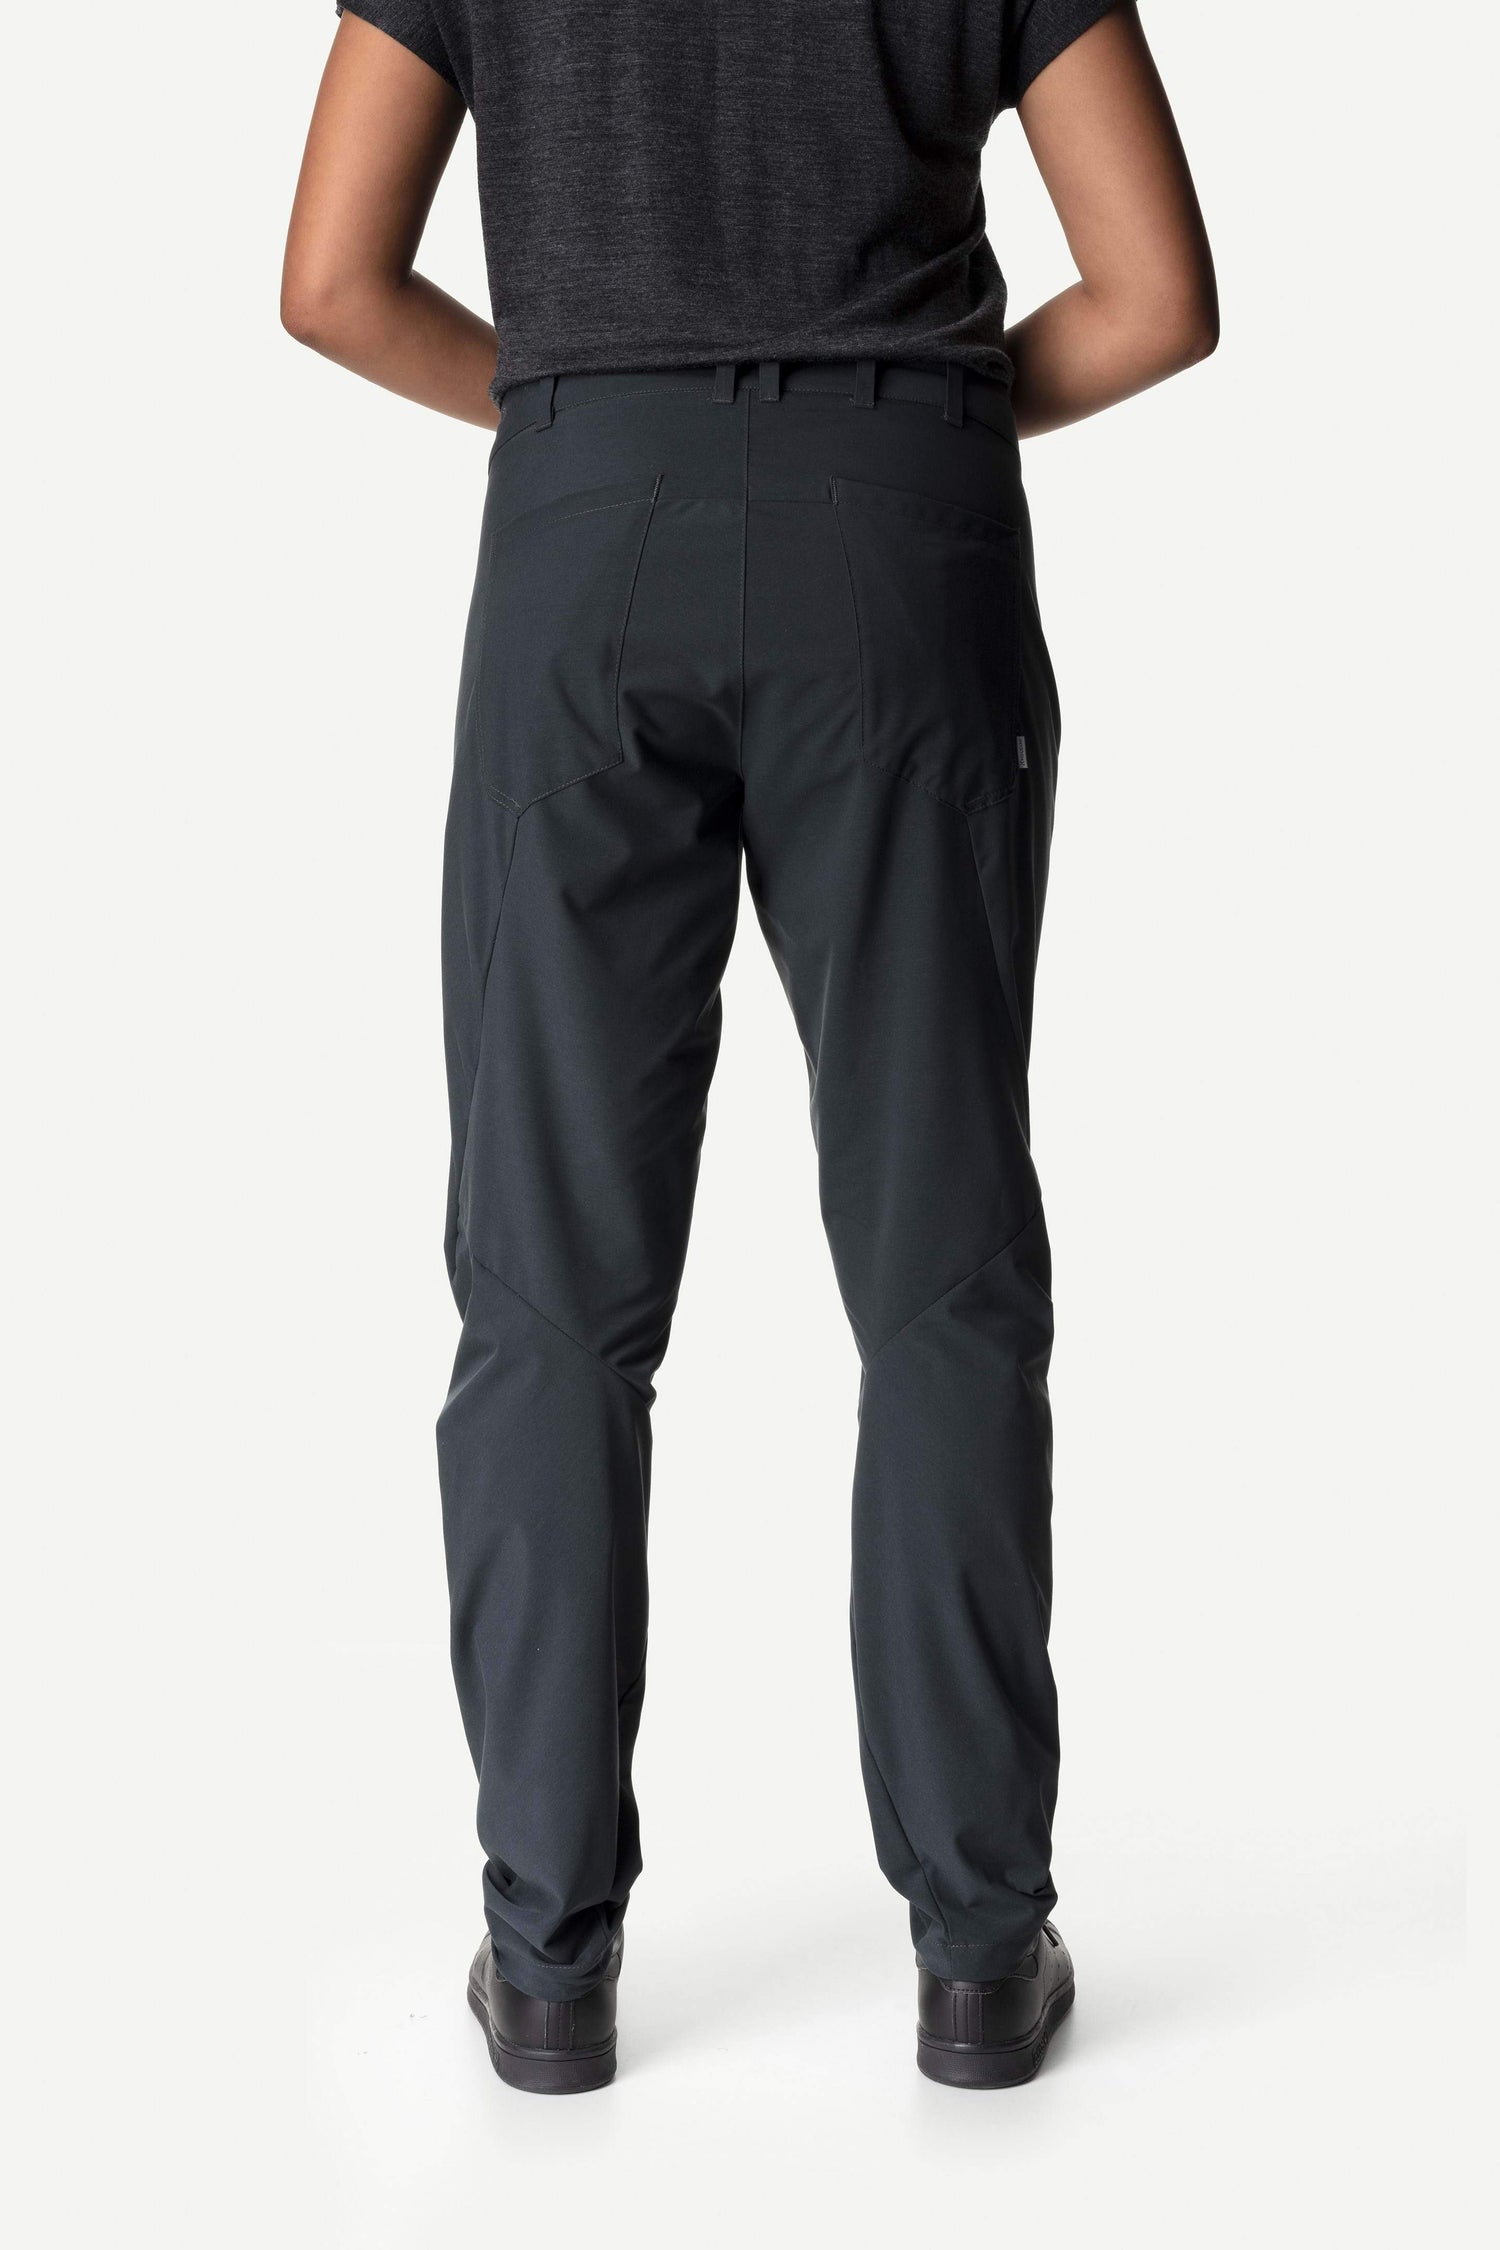 Houdini W's MTM Thrill Twill Outdoor Pants - Recycled Polyester Rock Black Pants